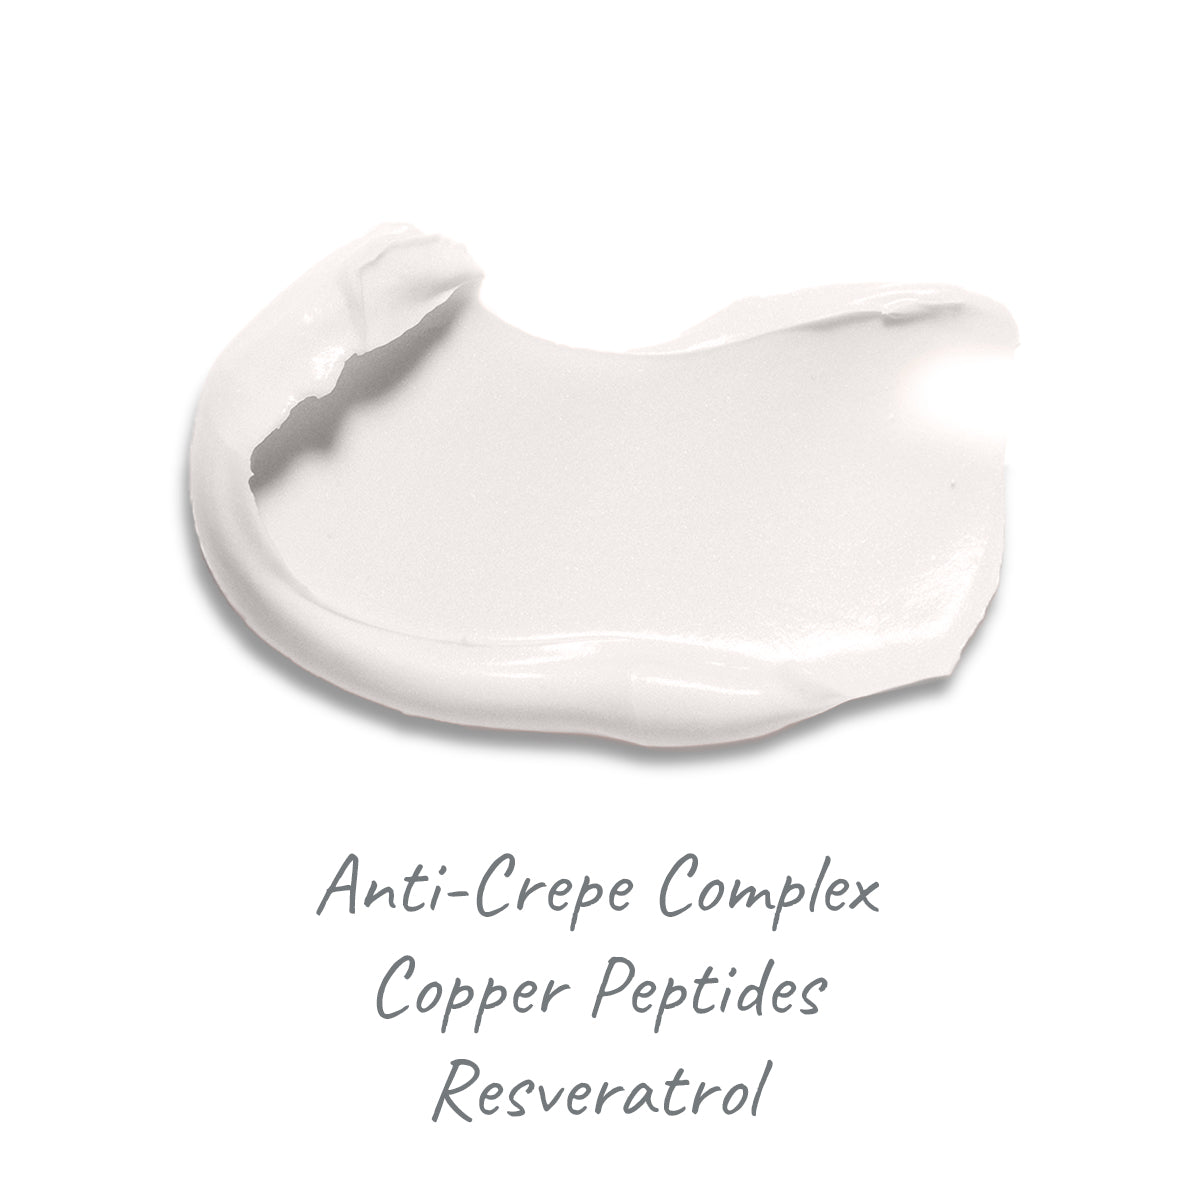 Crepey Skin Repair Treatment - by DERMA E |ProCare Outlet|